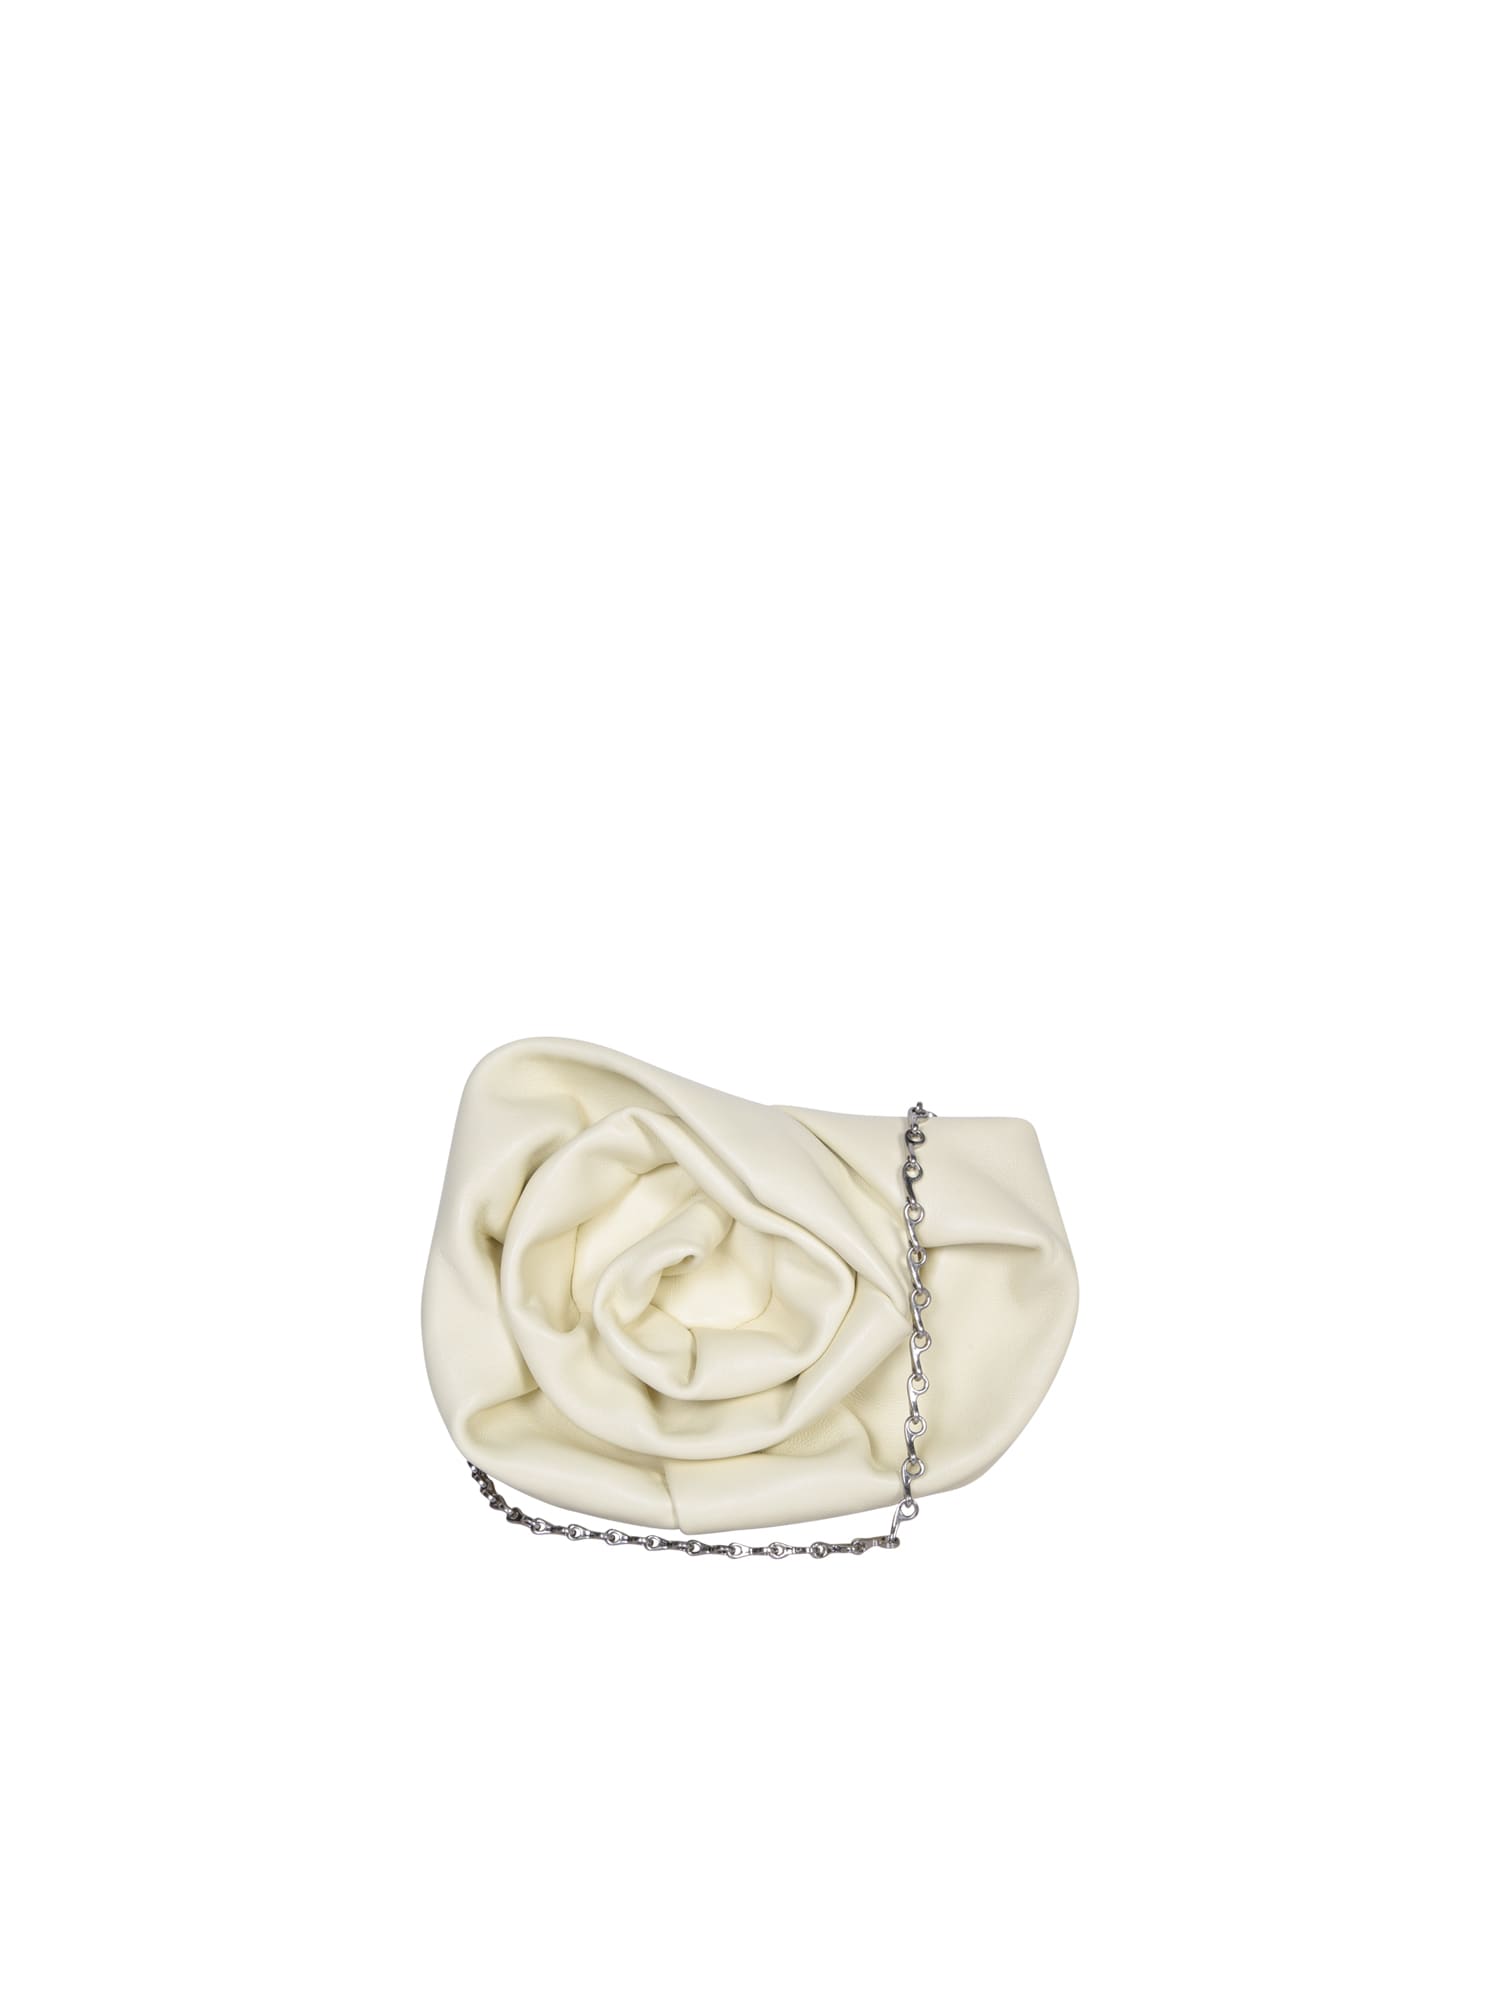 Burberry Rose Clutch Chain Yellow Bag